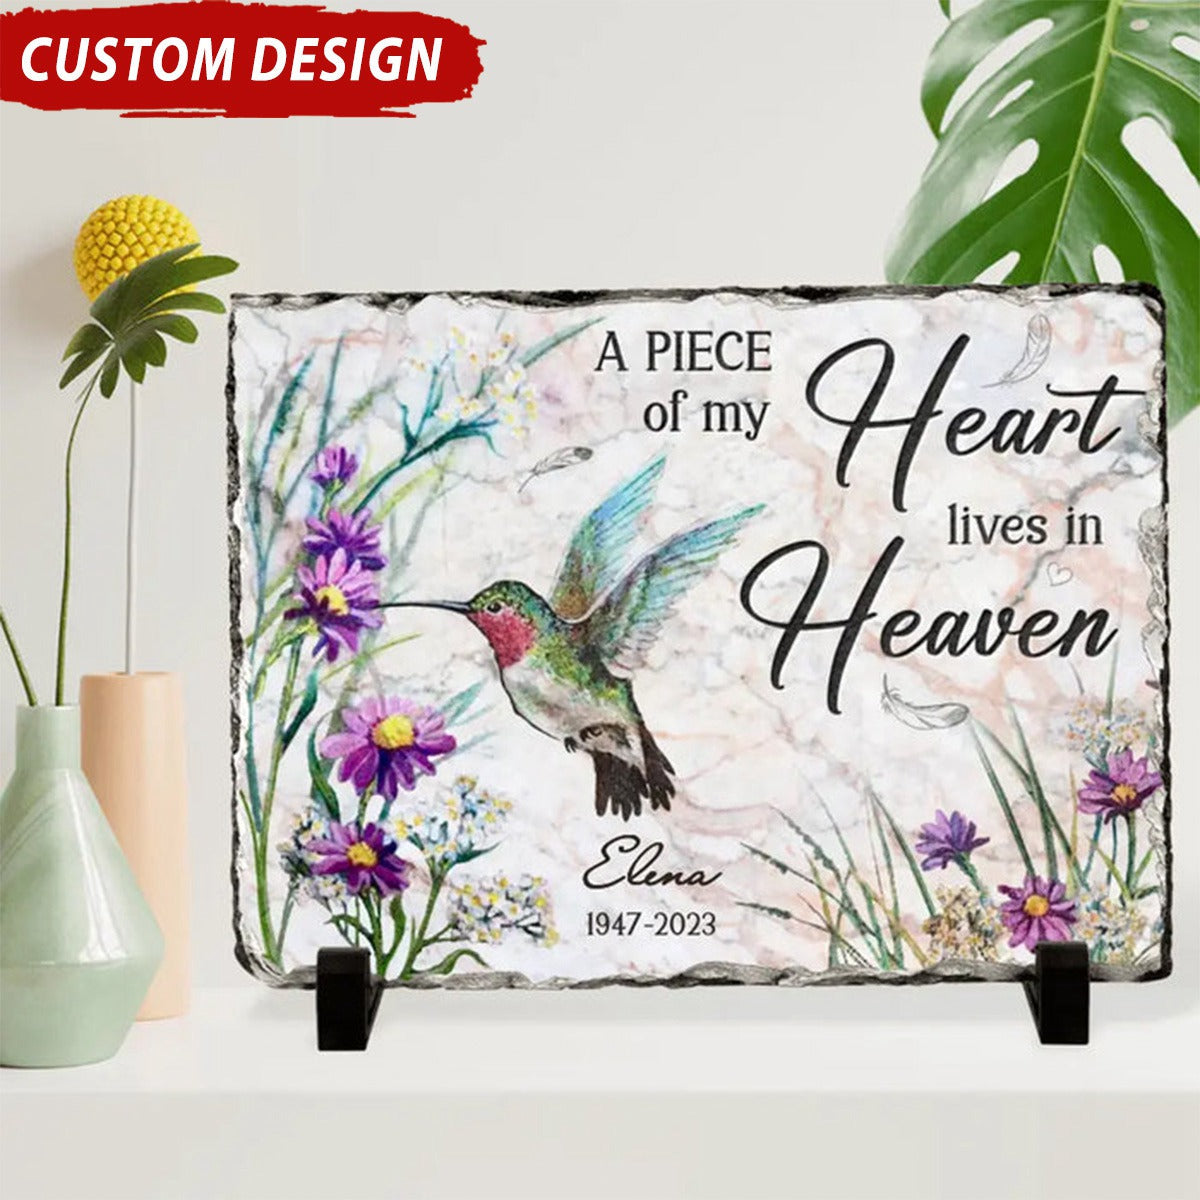 A Piece Of My Heart Lives In Heaven - Personalized Rectangle Stone With Stand - Memorial Gift Idea For Family Member